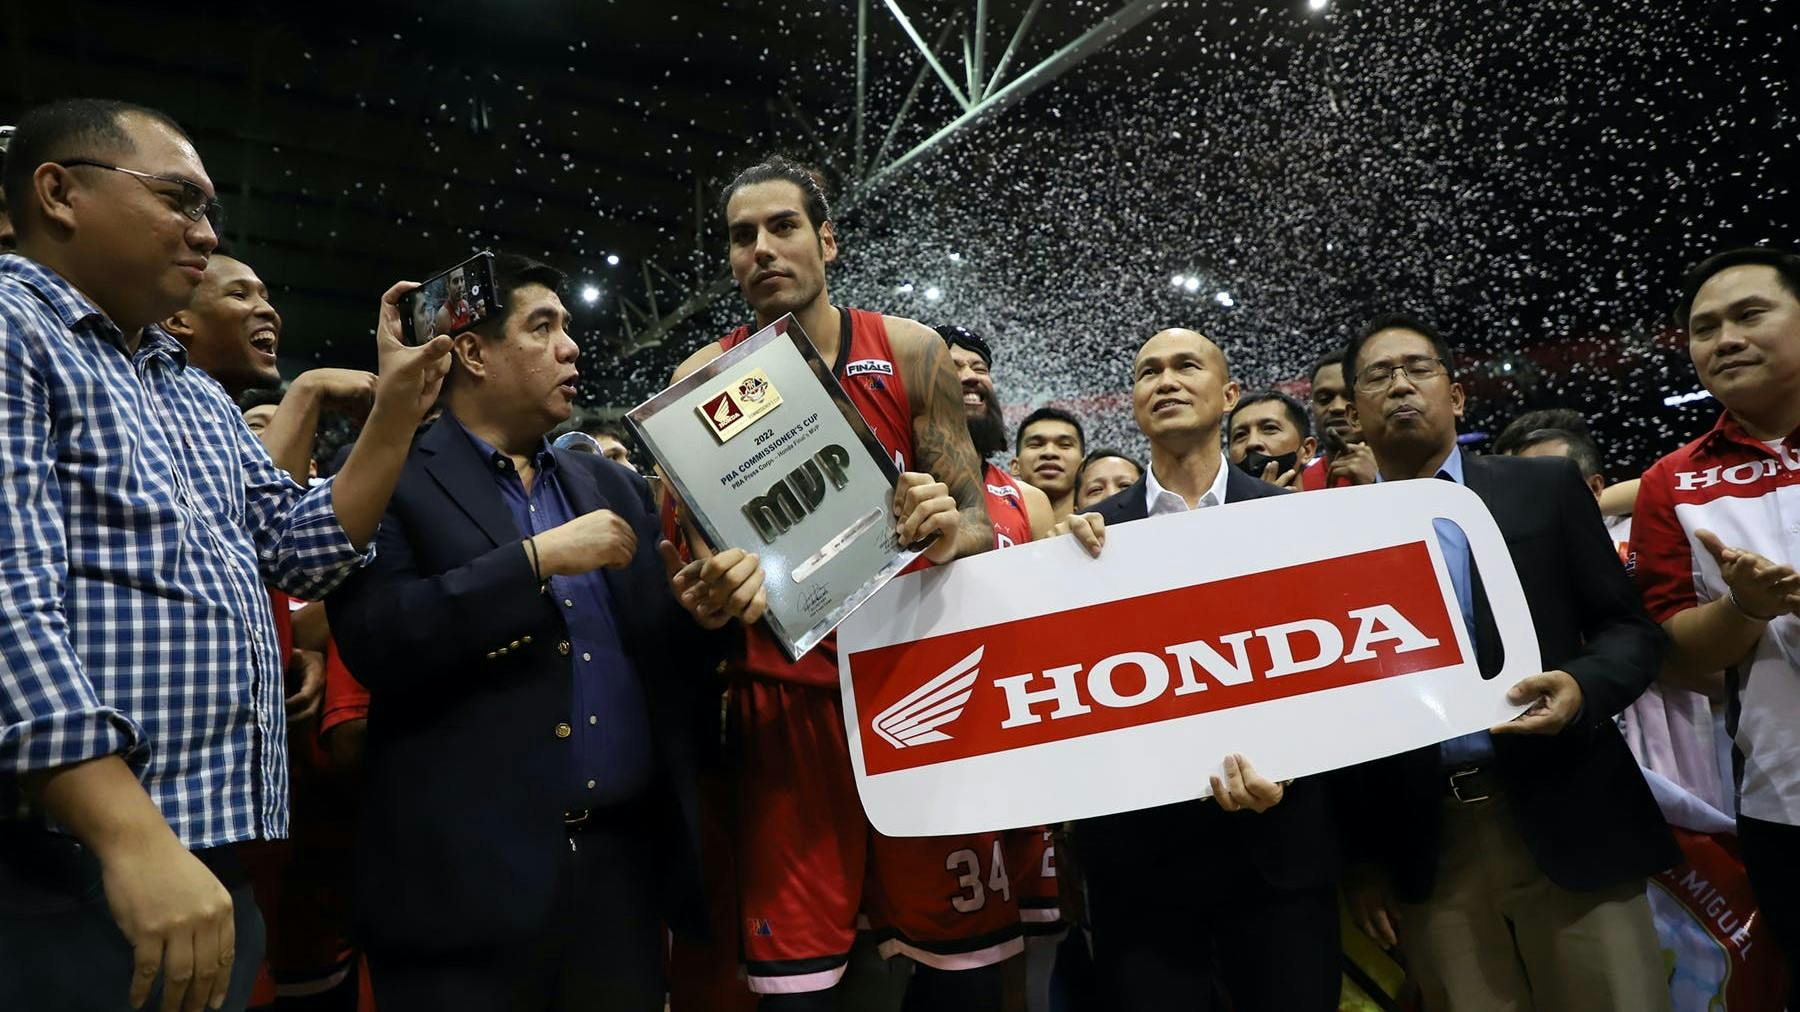 A look at how Christian Standhardinger imposed his presence towards a Finals MVP plum